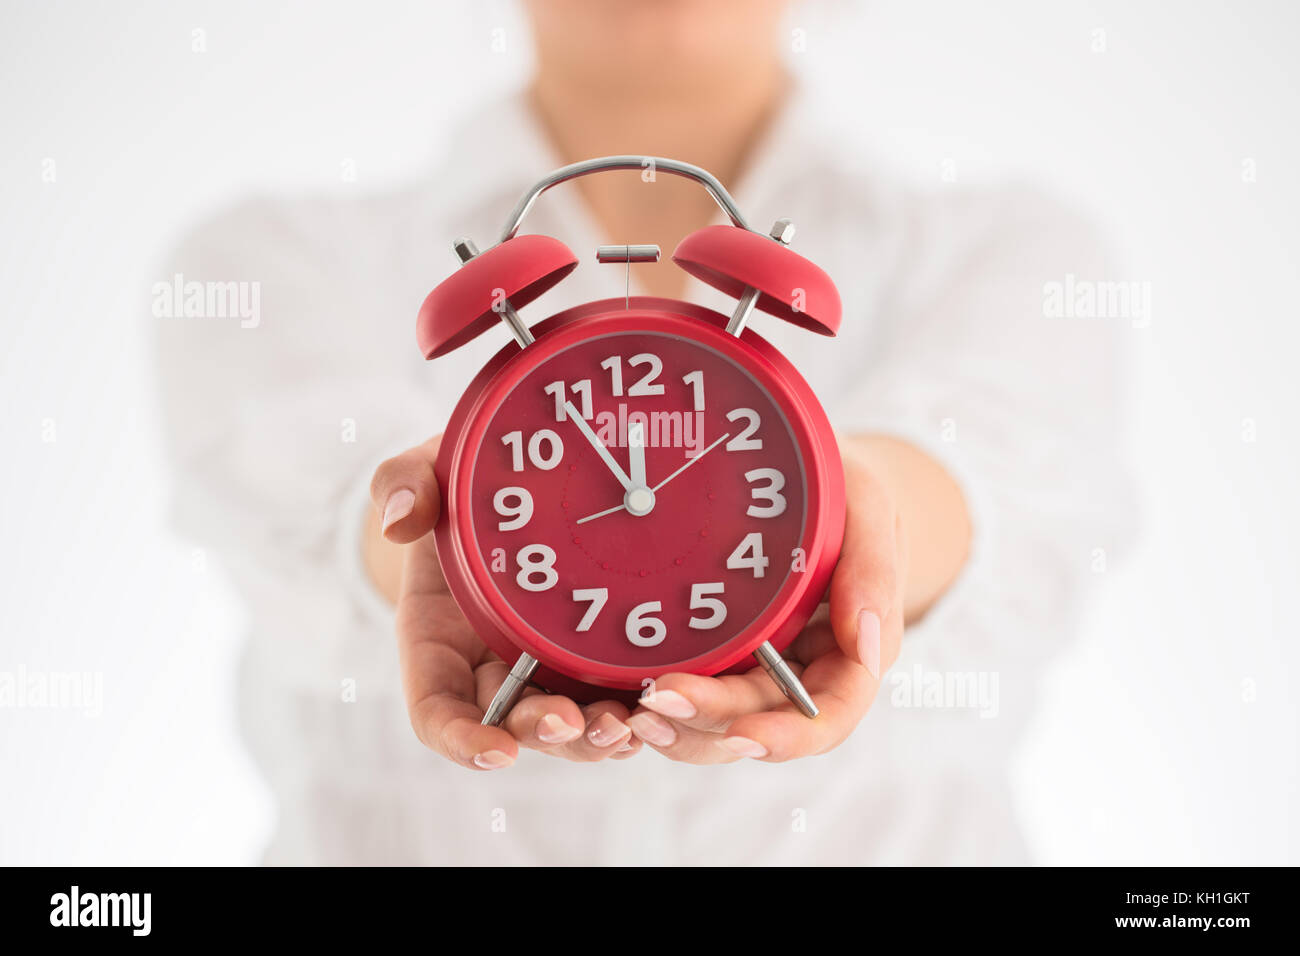 Counting hours expecting child birth. Motherhood concept. Pregnant woman holding alarm clock, studio shot. Stock Photo